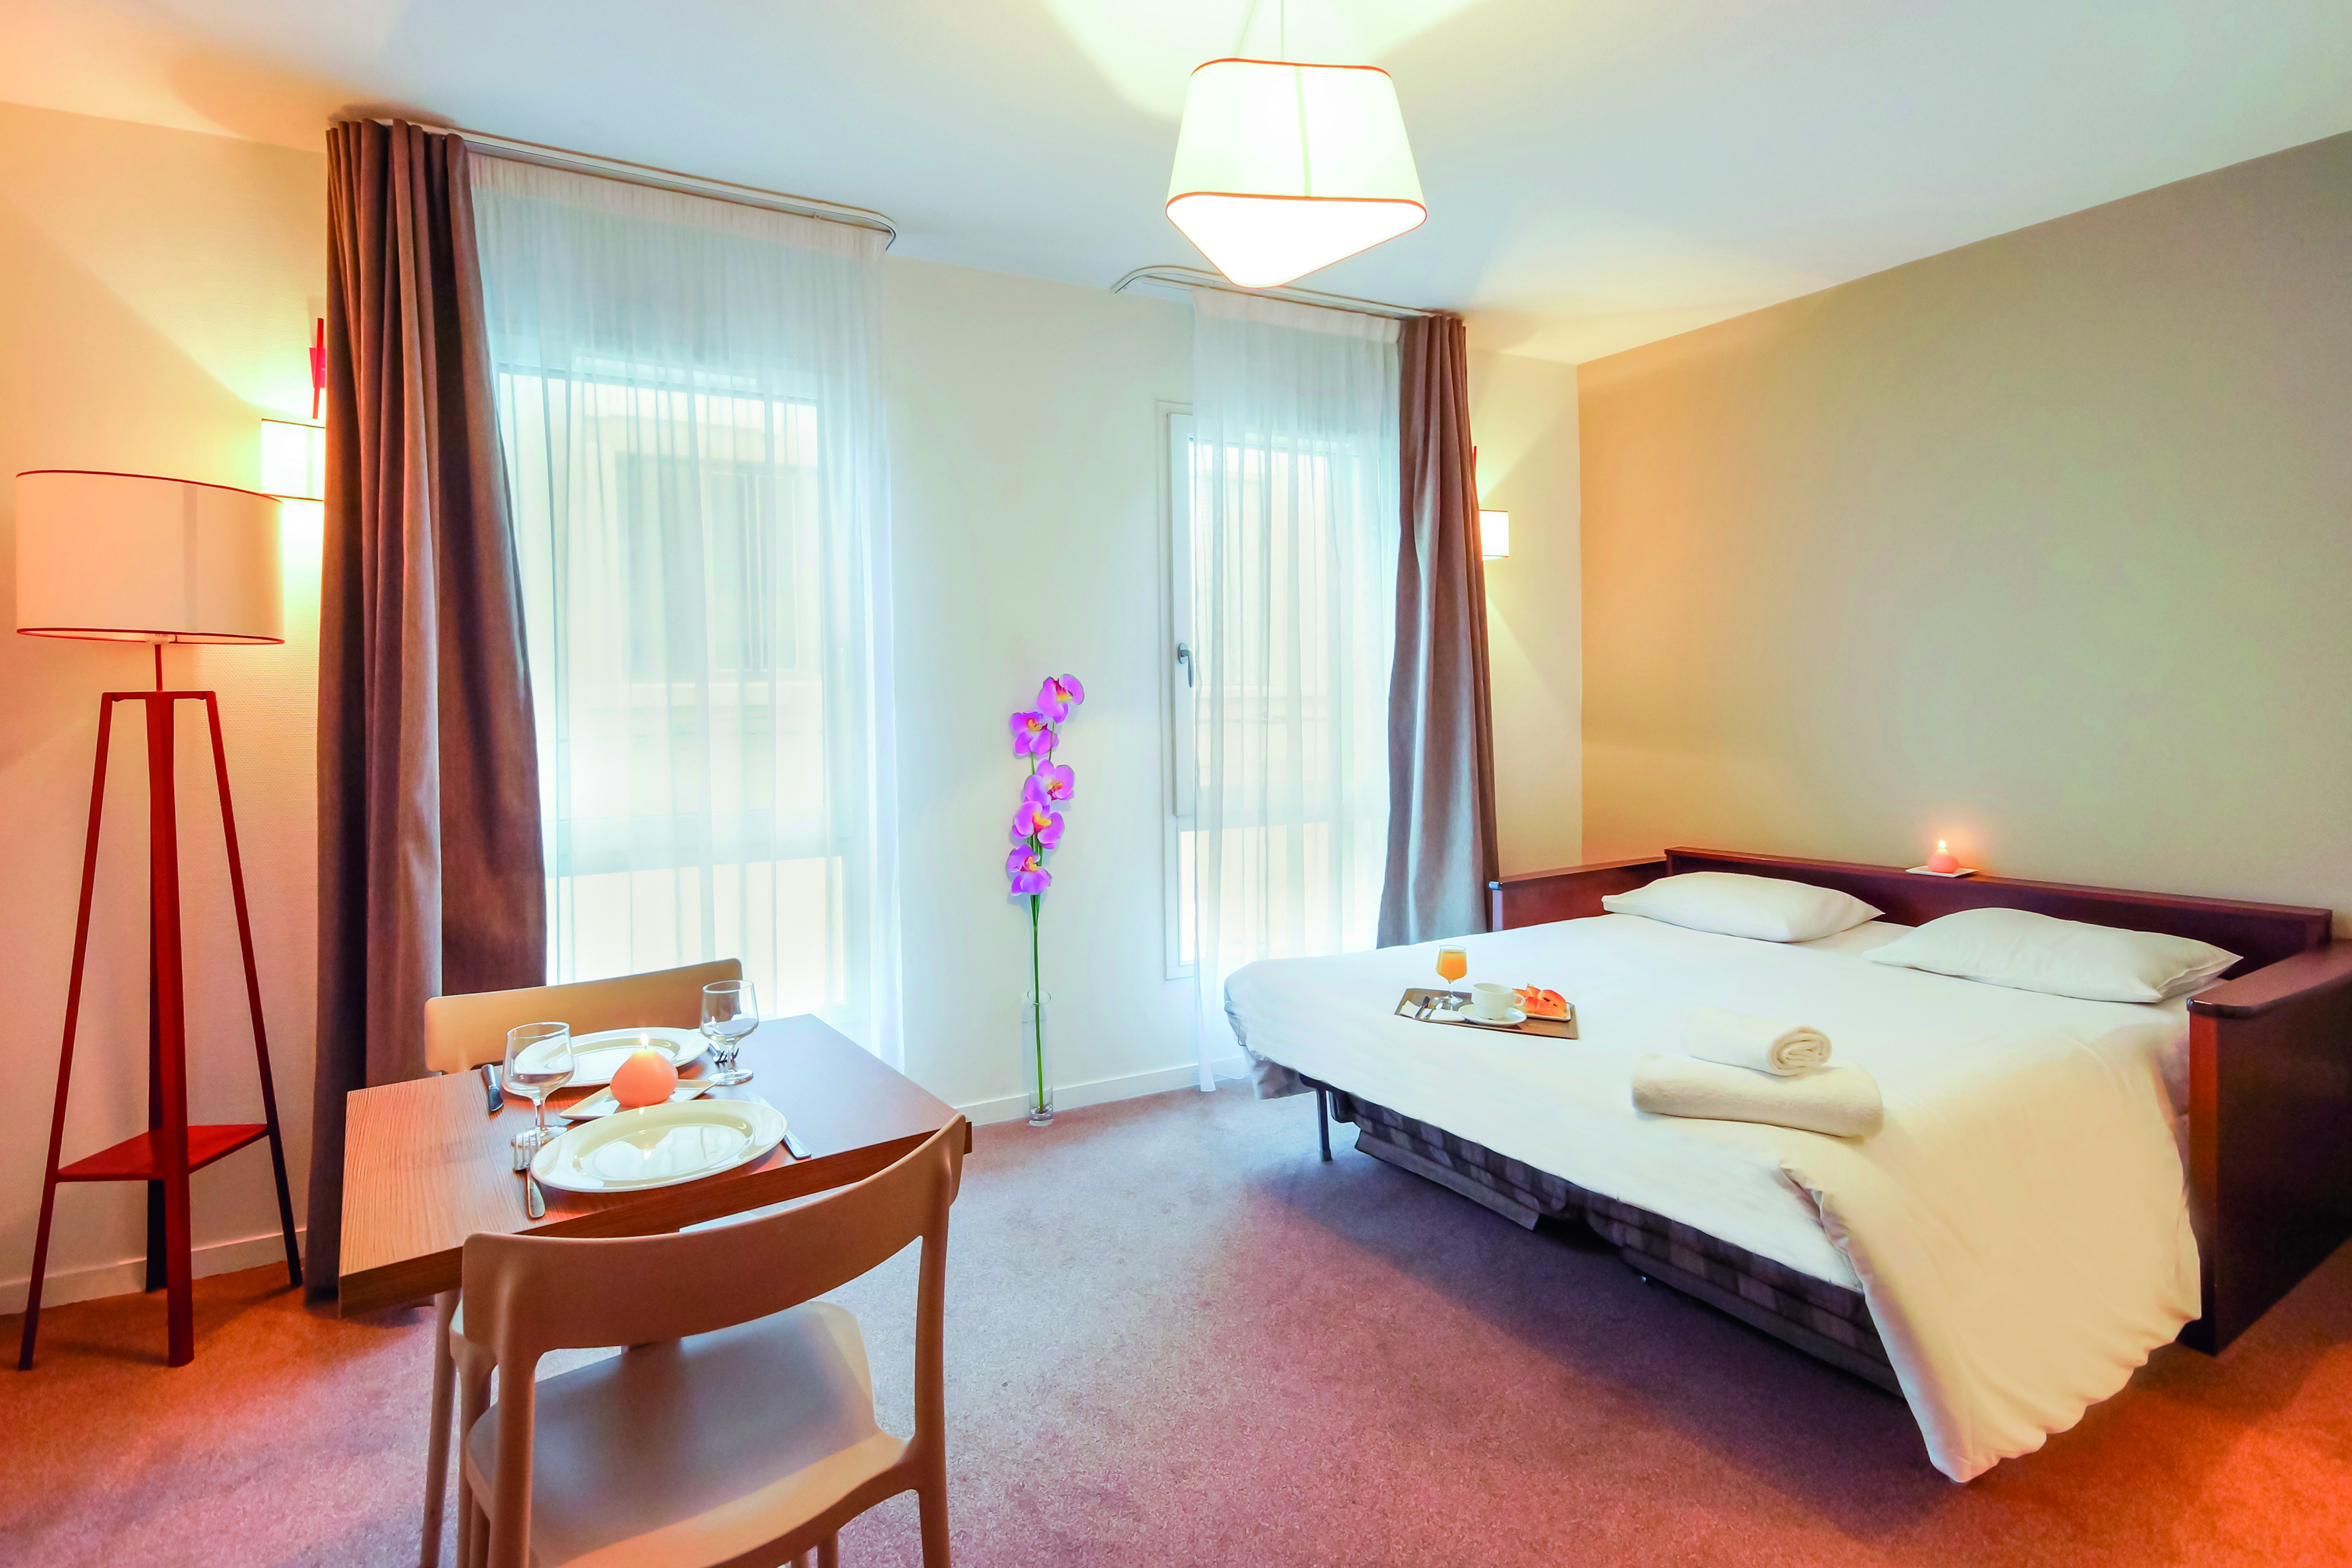 Appart'City Valence Centre-Valence Updated 2023 Room Price-Reviews & Deals  | Trip.com